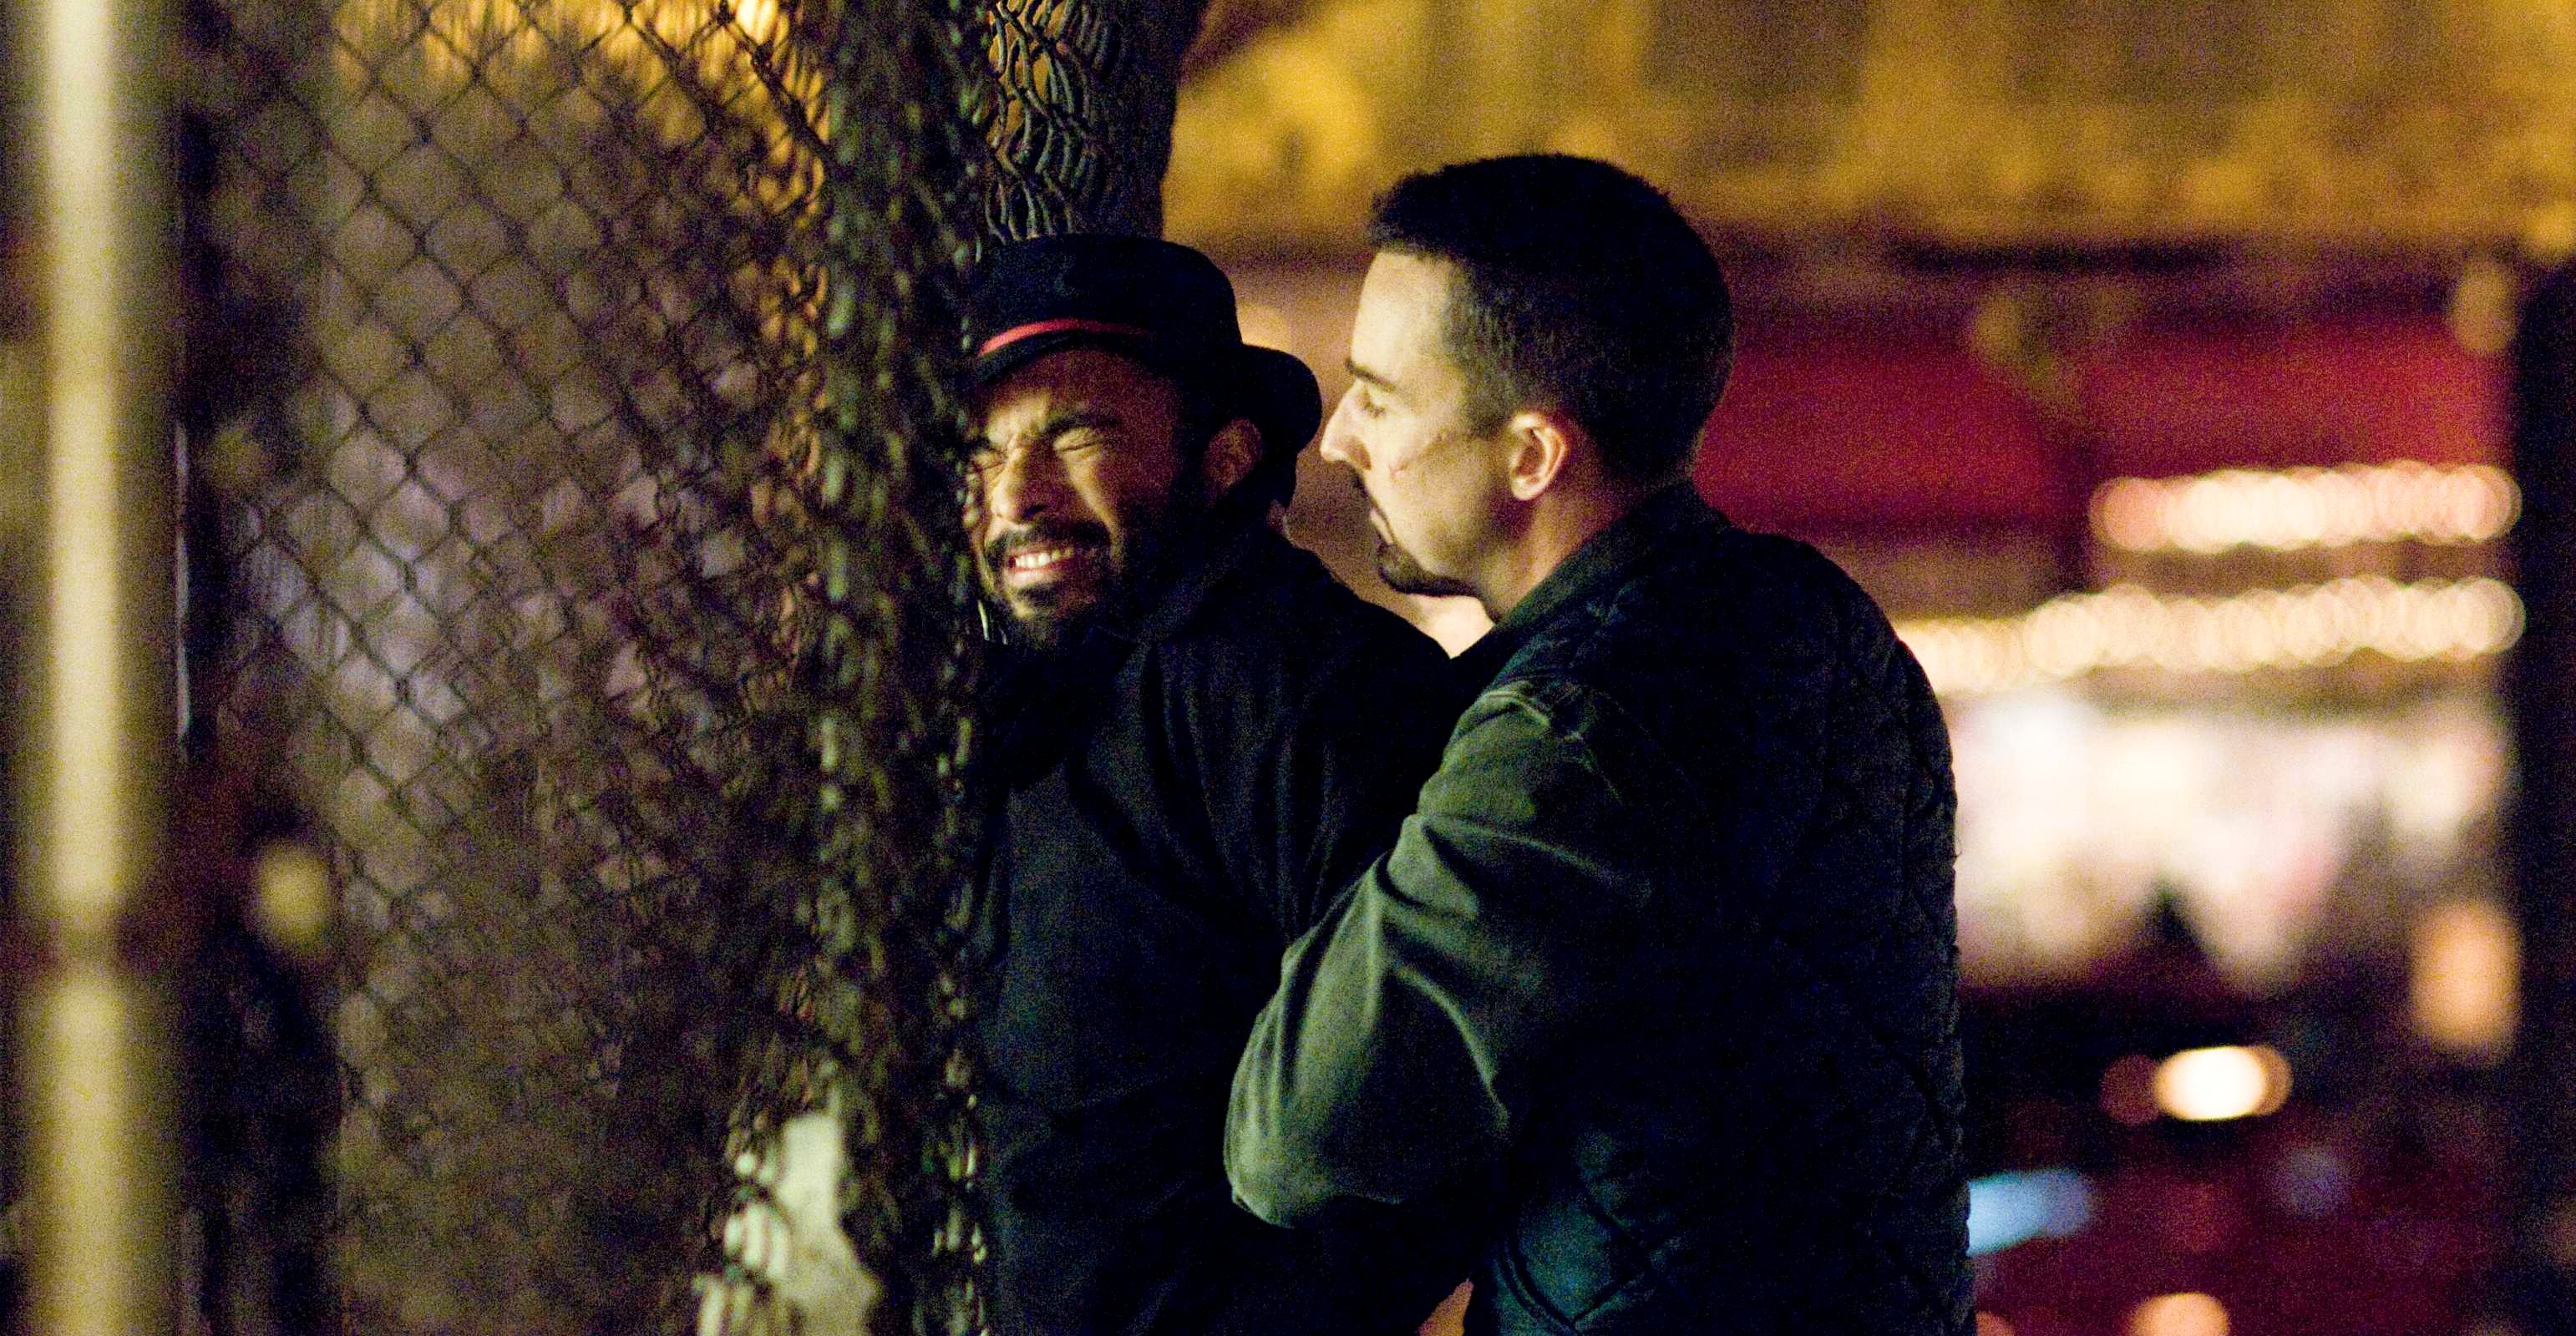 Maximiliano Hernandez stars as Carlos Bragon and Edward Norton stars as Ray Tierney in New Line Cinema's Pride and Glory (2008). Photo credit by Glen Wilson.